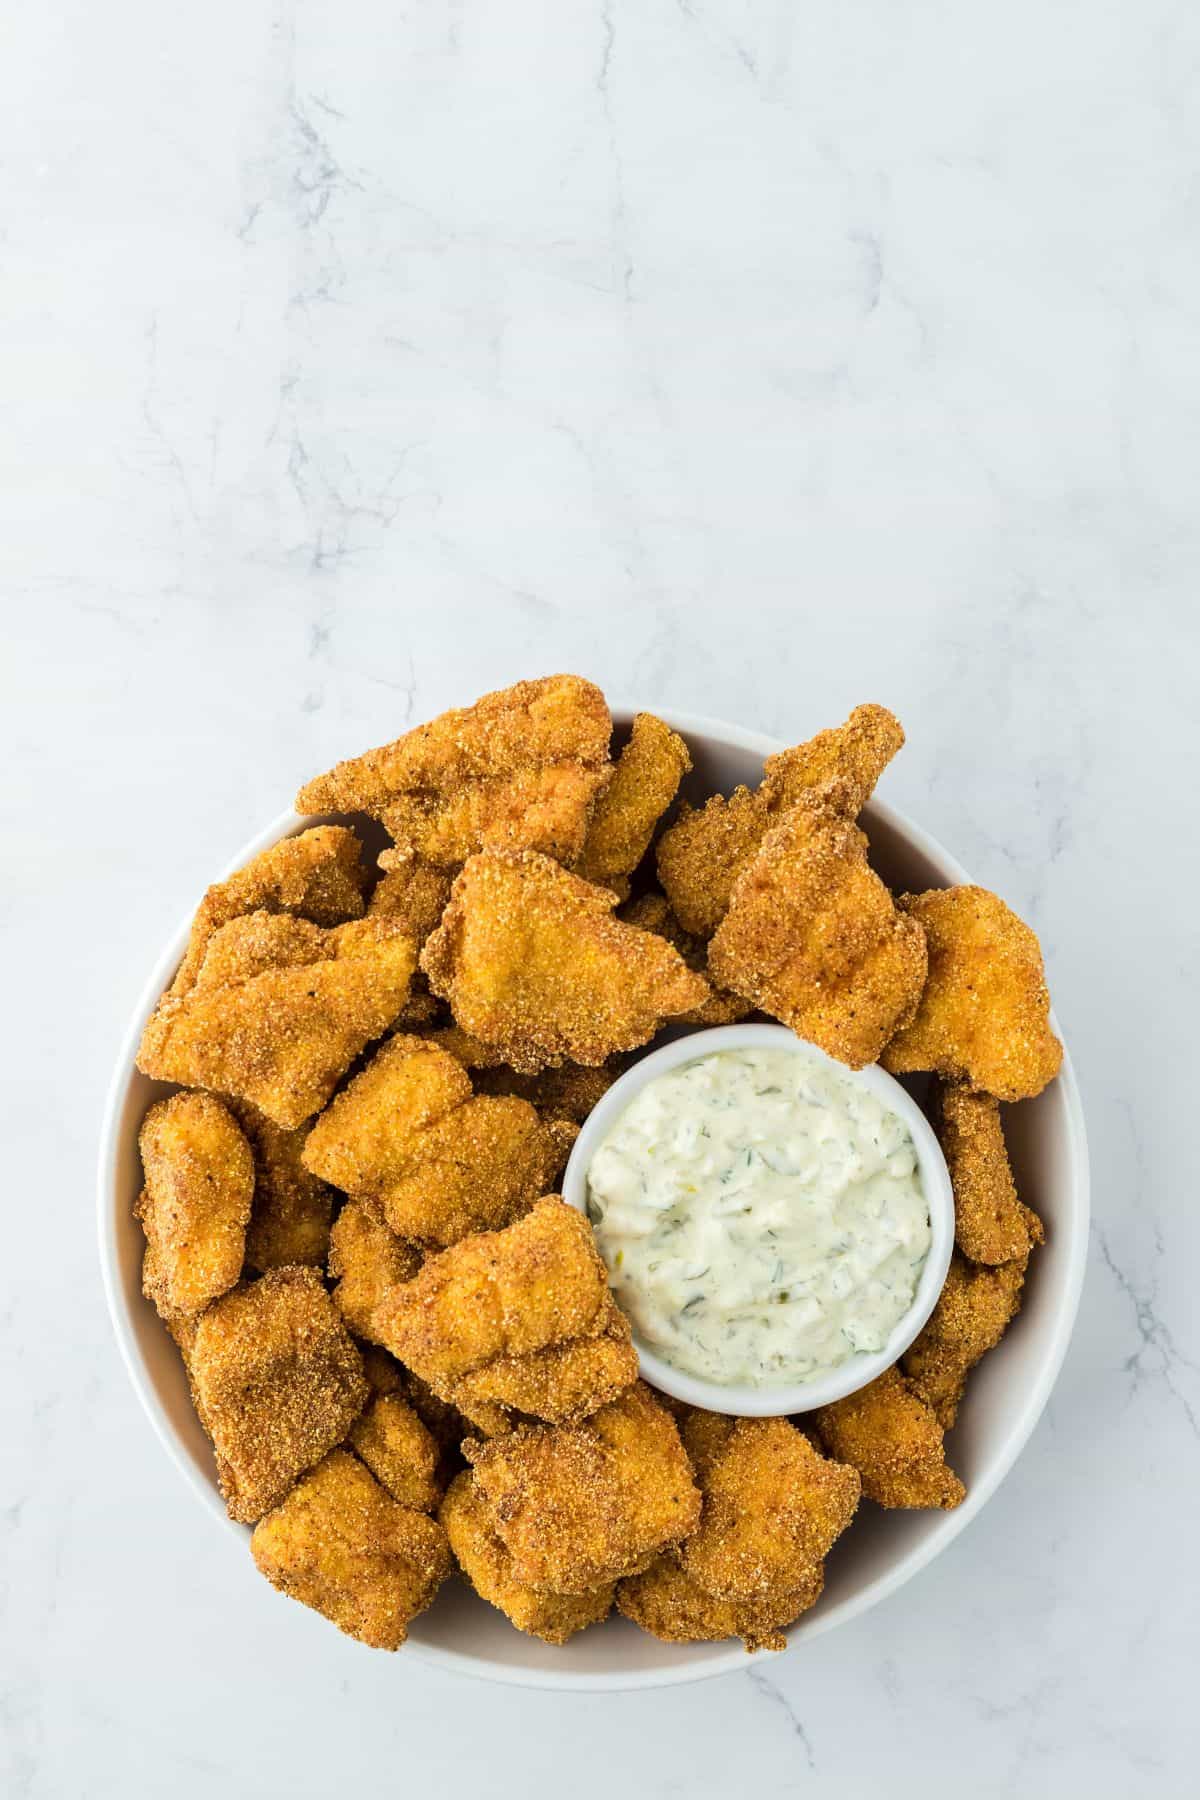 Overhead shot of a large bowl of catfish nuggets with a ramekin of tartar sauce in the center, set on a white marble surface